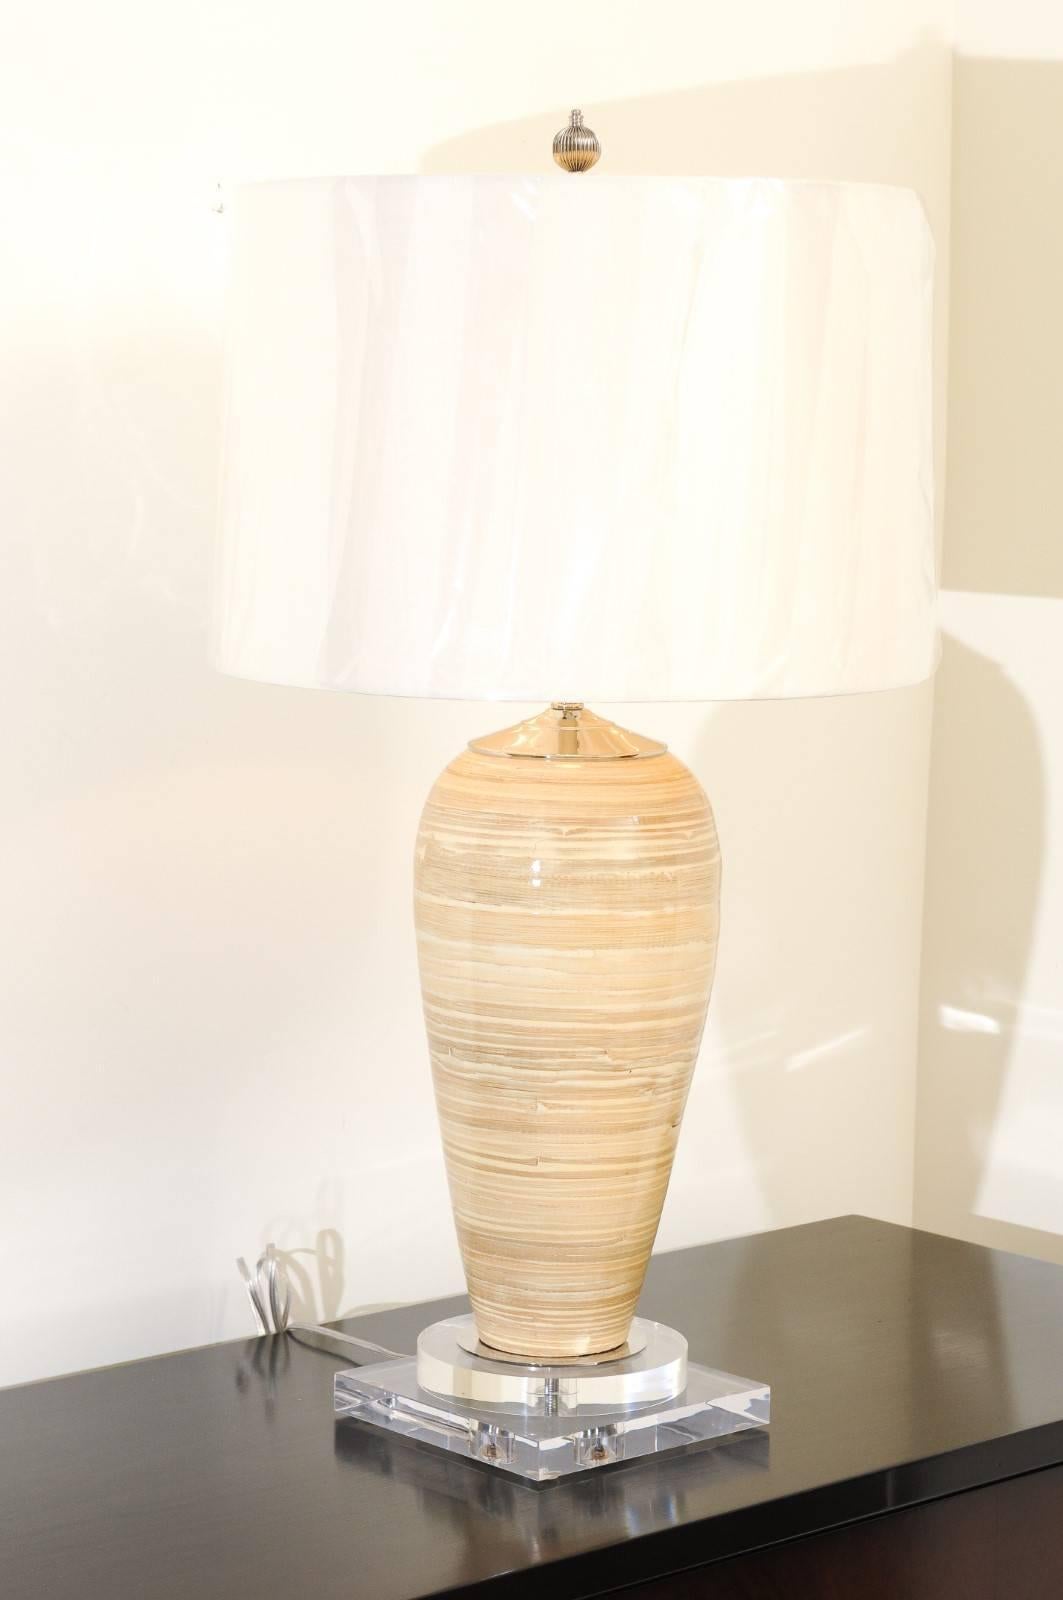 These magnificent lamps are shipped as photographed and described in the narrative. They are custom built using materials of the highest quality and are shipped complete with the new shades, harps and finials shown in the photos.

An exquisite pair